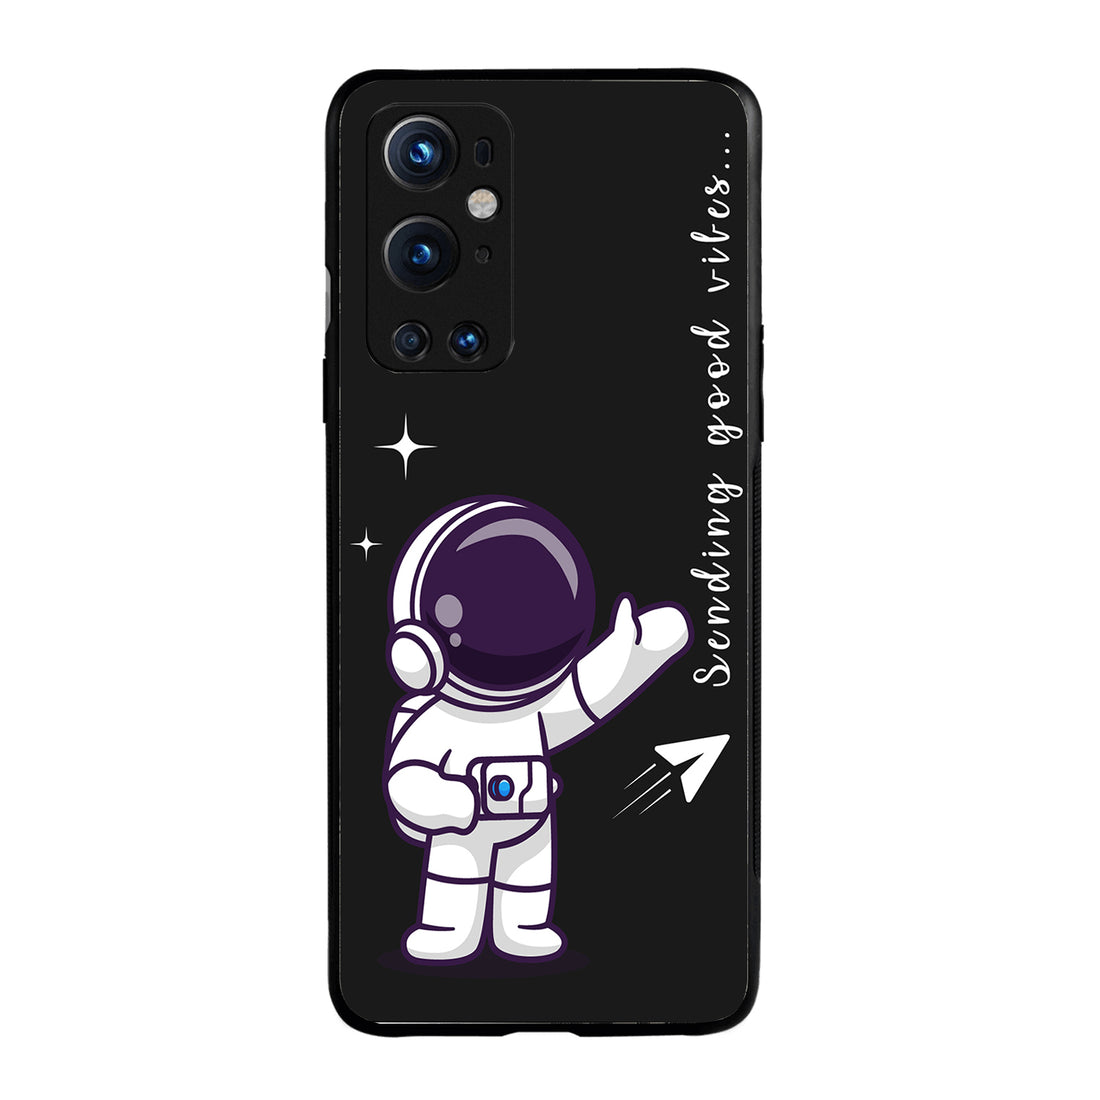 Spending Good Vibes Bff Oneplus 9 Pro Back Case